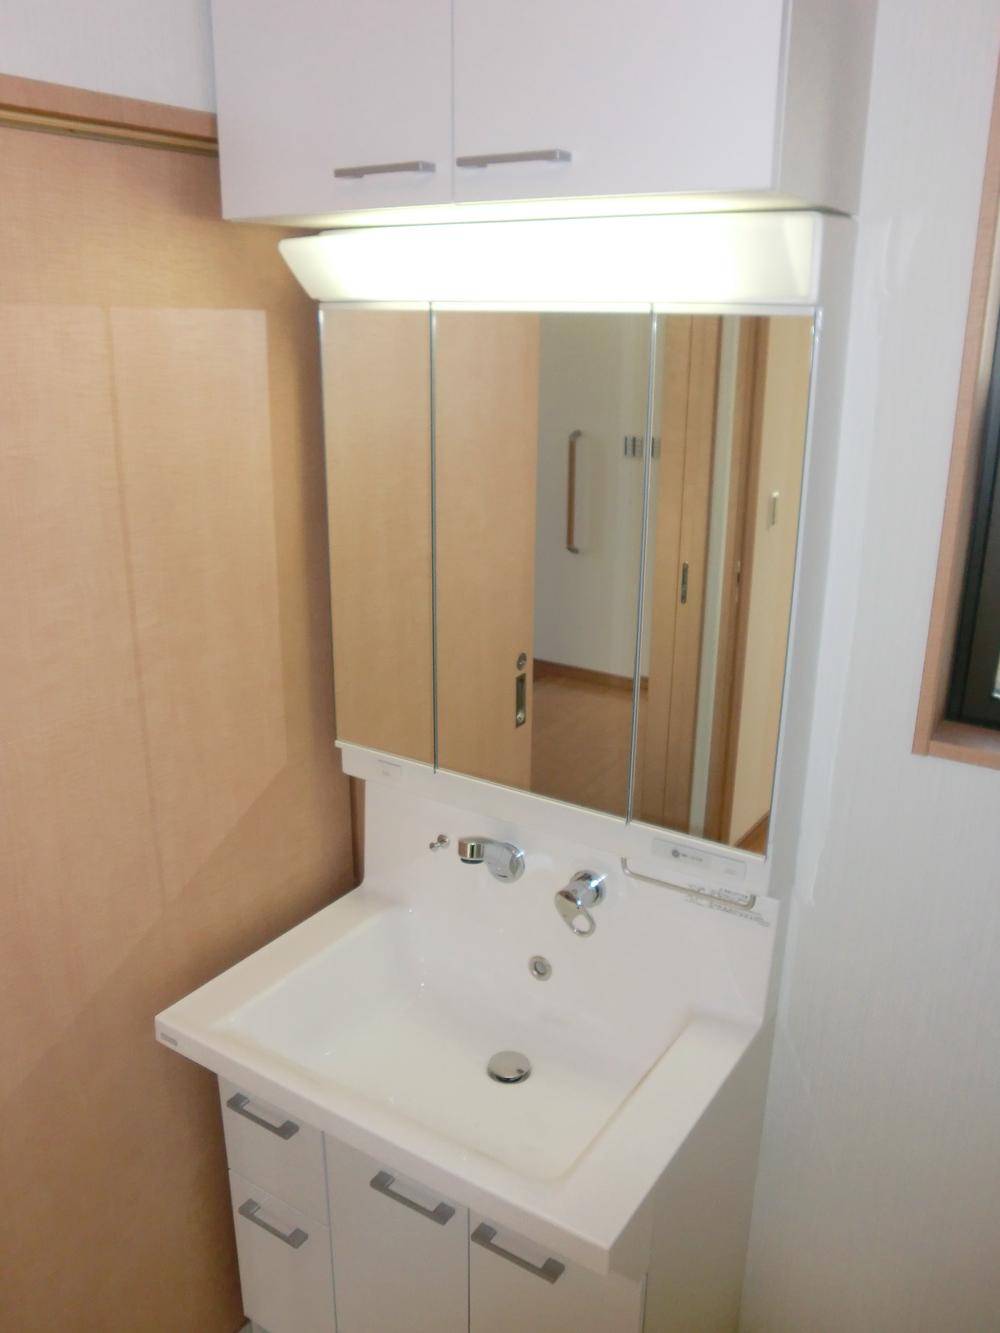 Wash basin, toilet. Washbasin with shower faucet